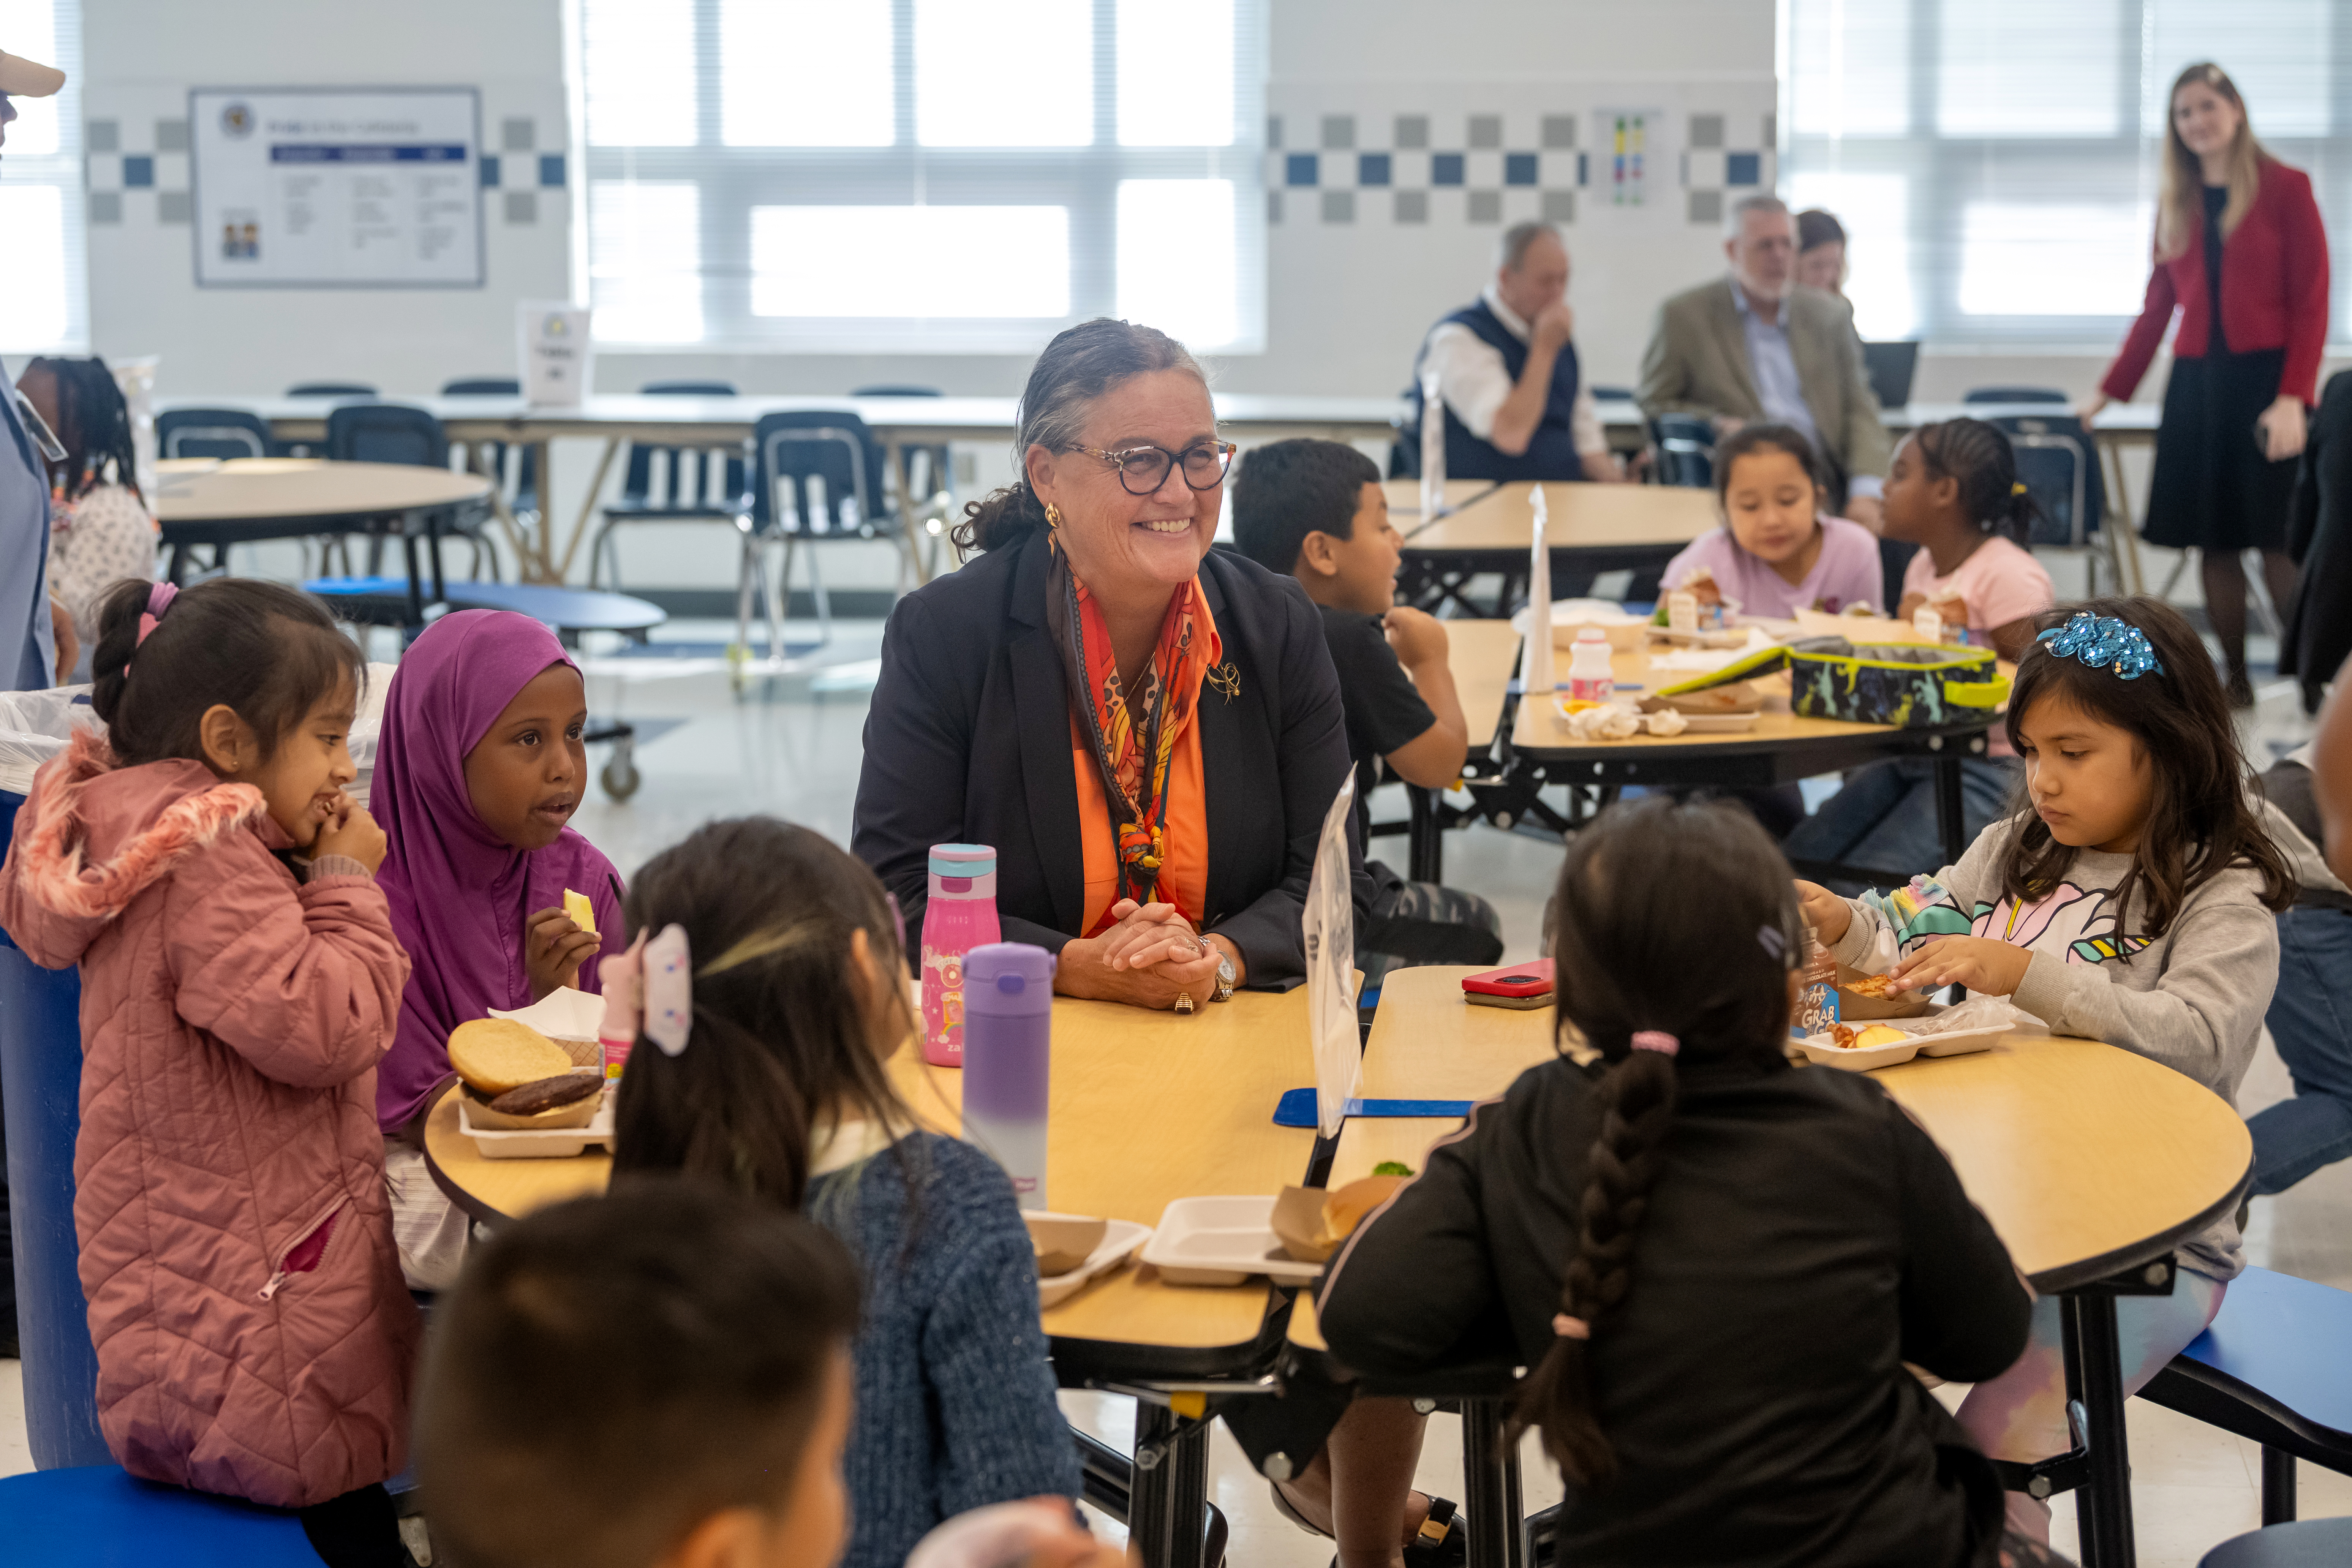 Superintendent Dr. Michelle Reid joins an Annandale Terrace ES student at the cafeteria table.